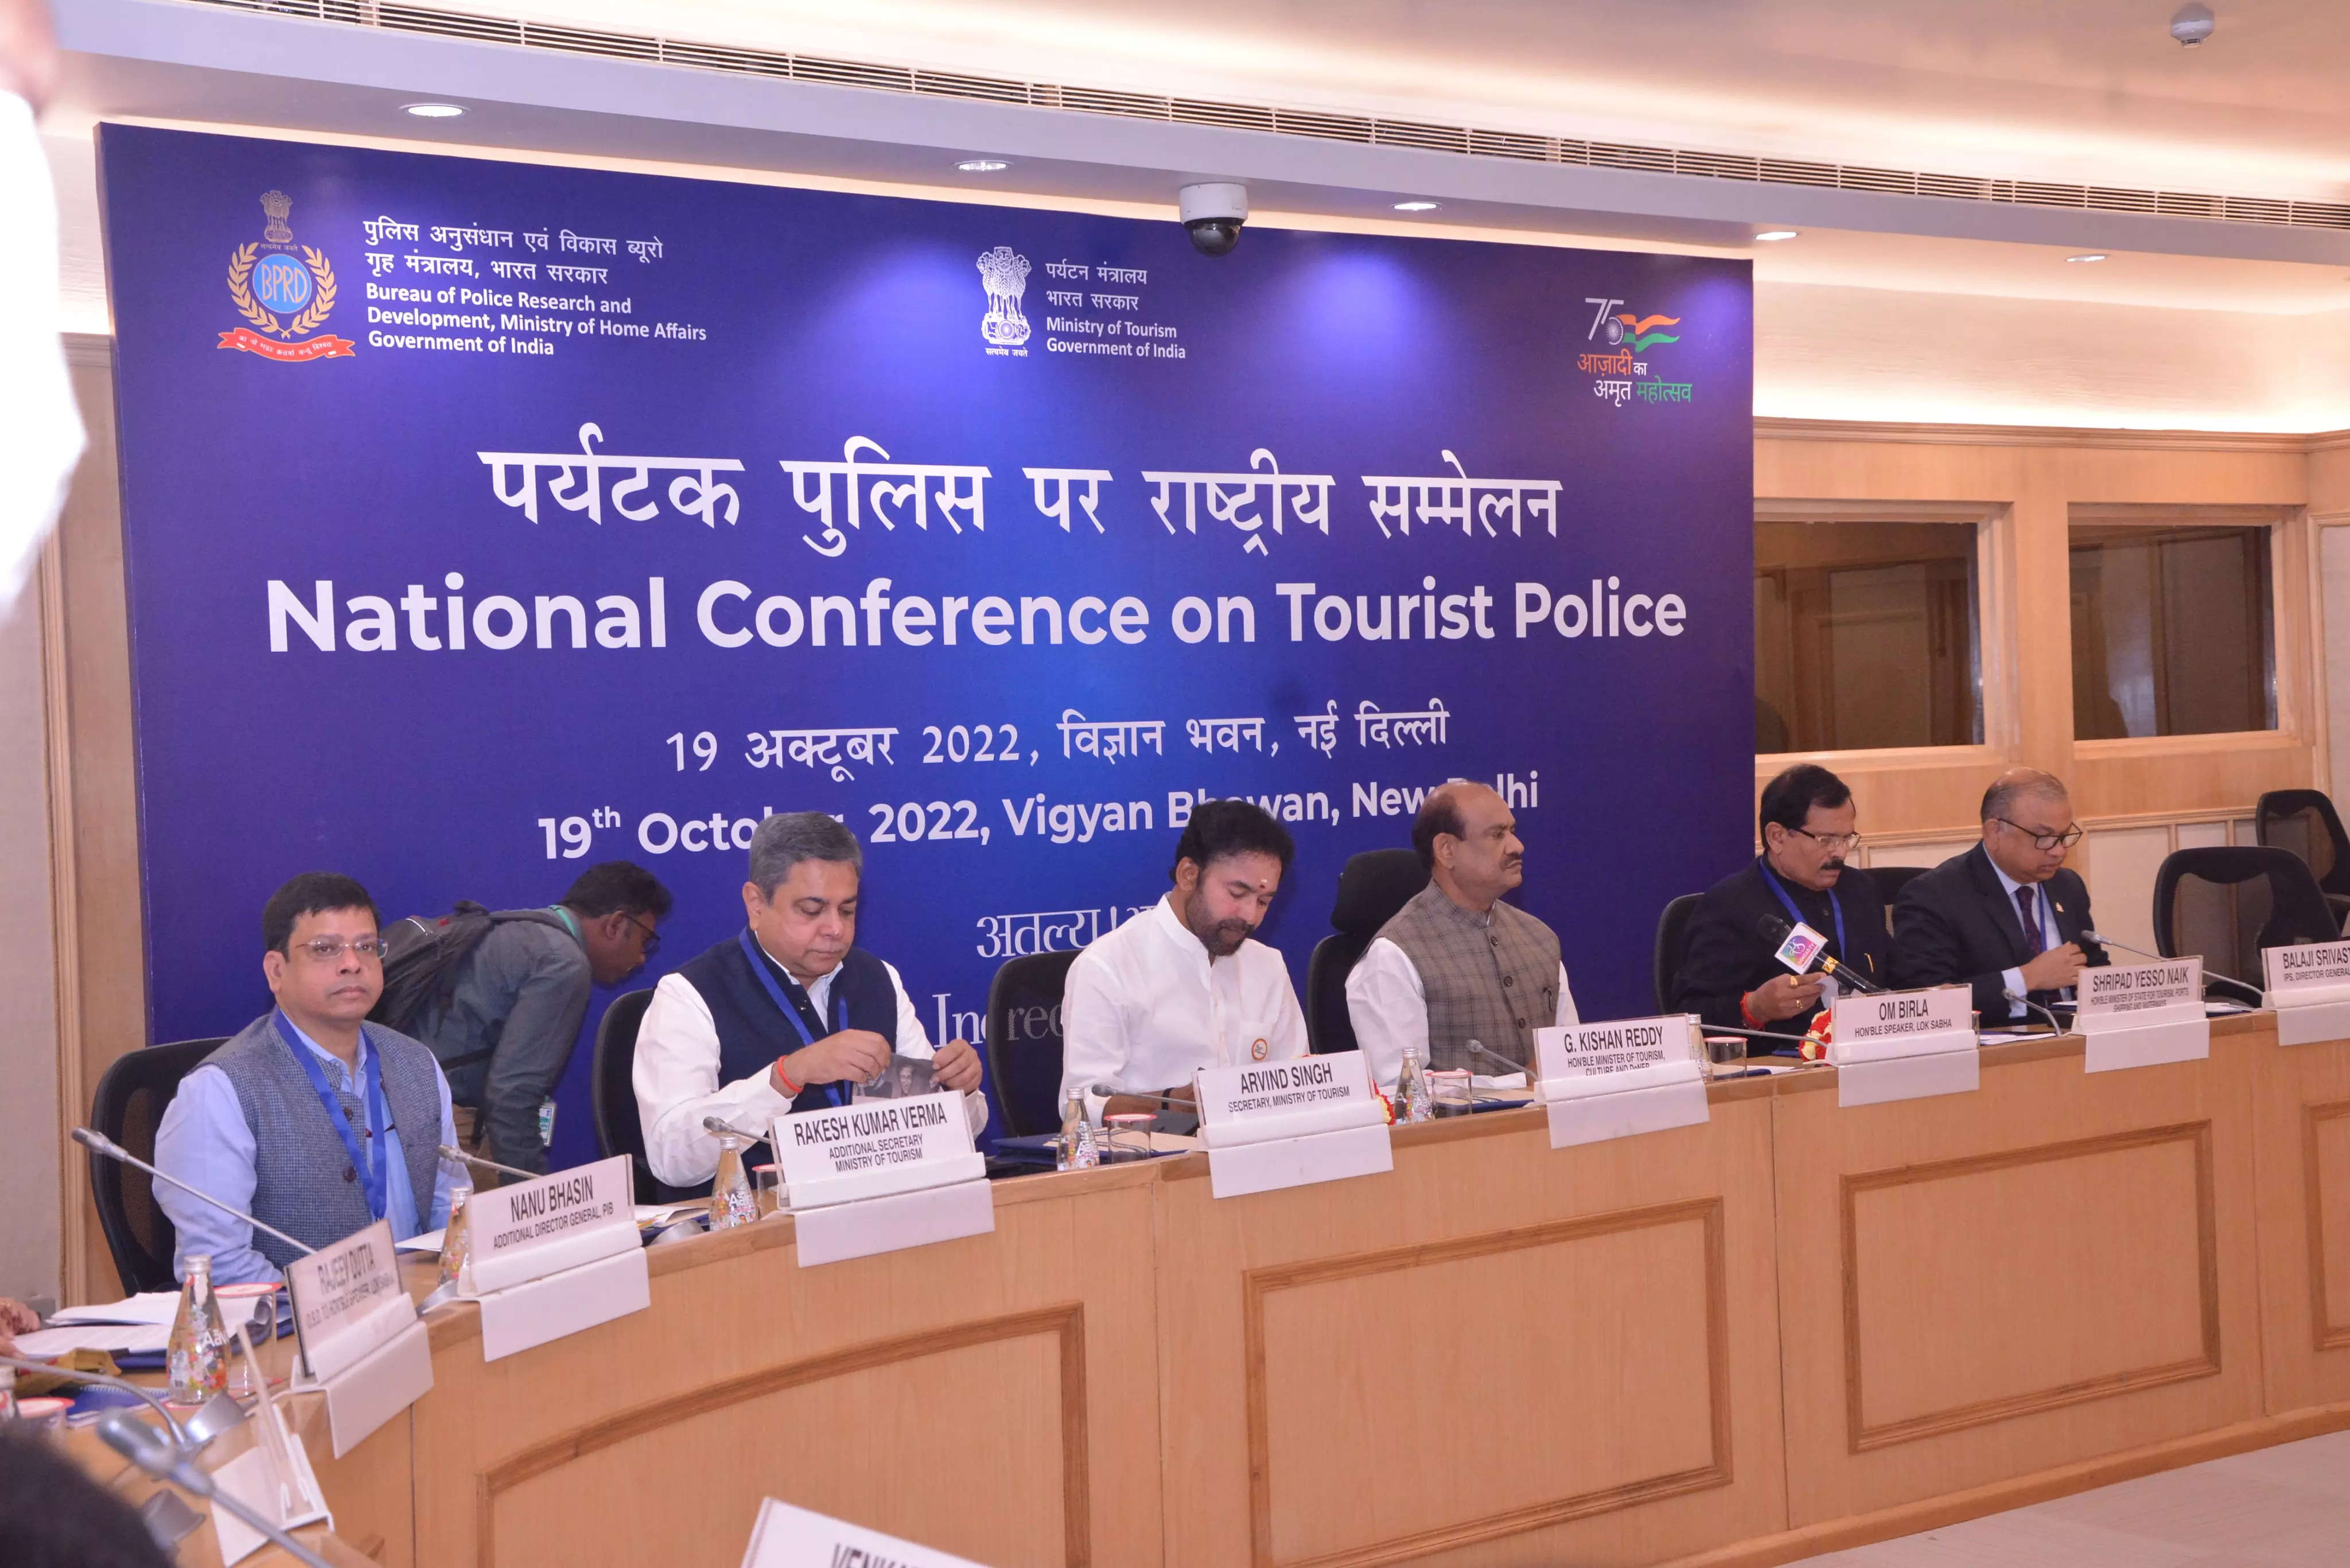 National Conference on Tourist Police Scheme spotlights need for safety & security of tourists in India